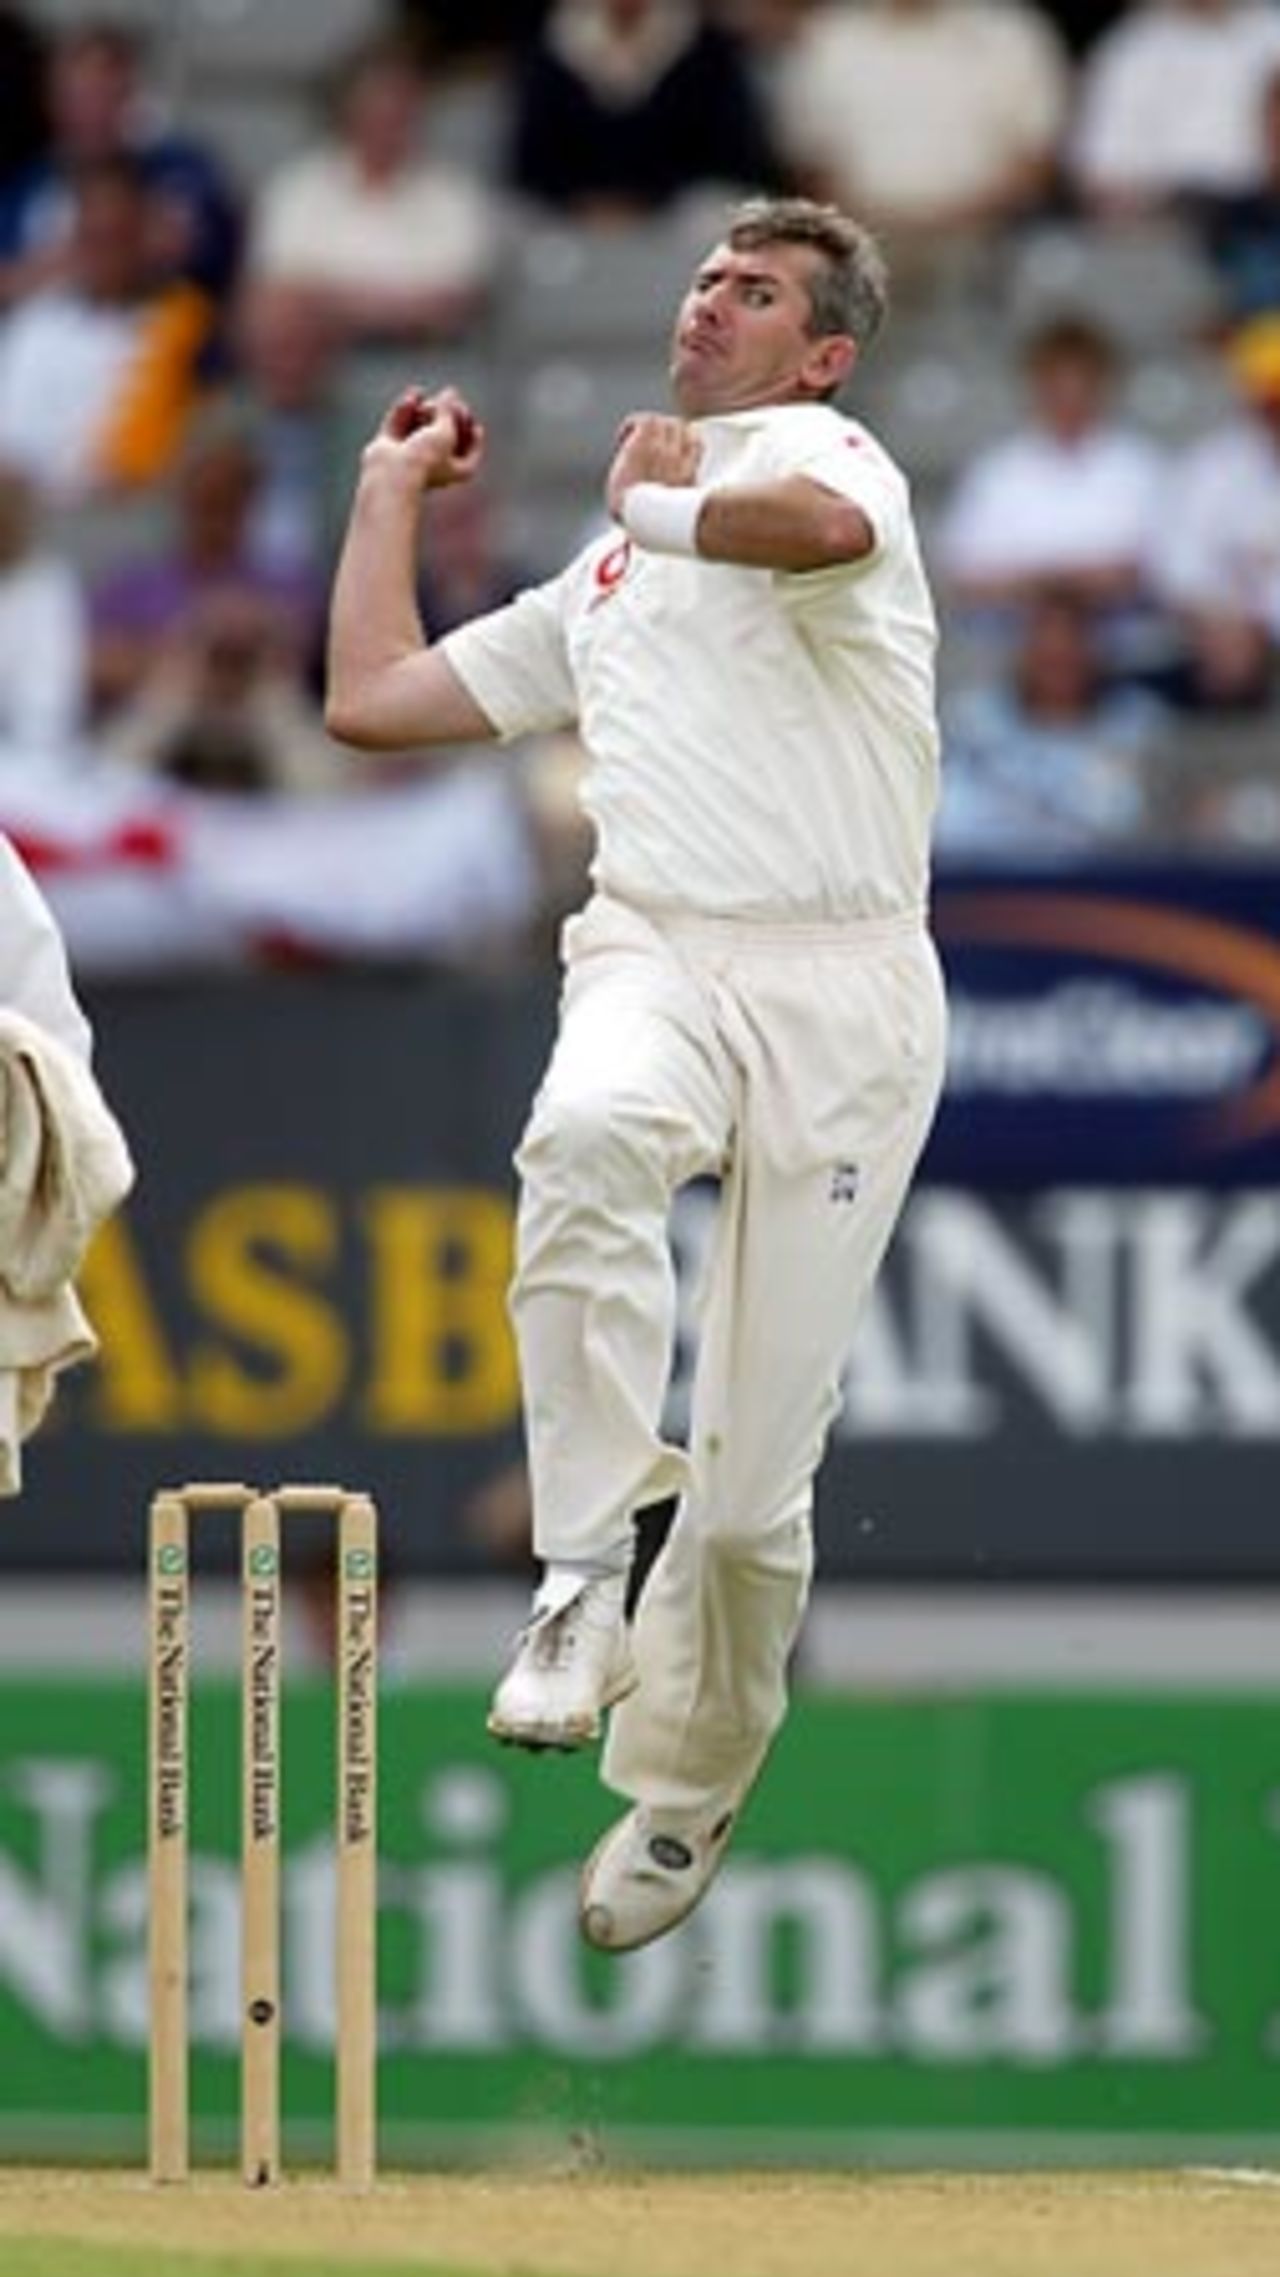 England bowler Andy Caddick delivers a ball during his first day spell of 4-57 from 20 overs. 3rd Test: New Zealand v England at Eden Park, Auckland, 30 March-3 April 2002 (30 March 2002).